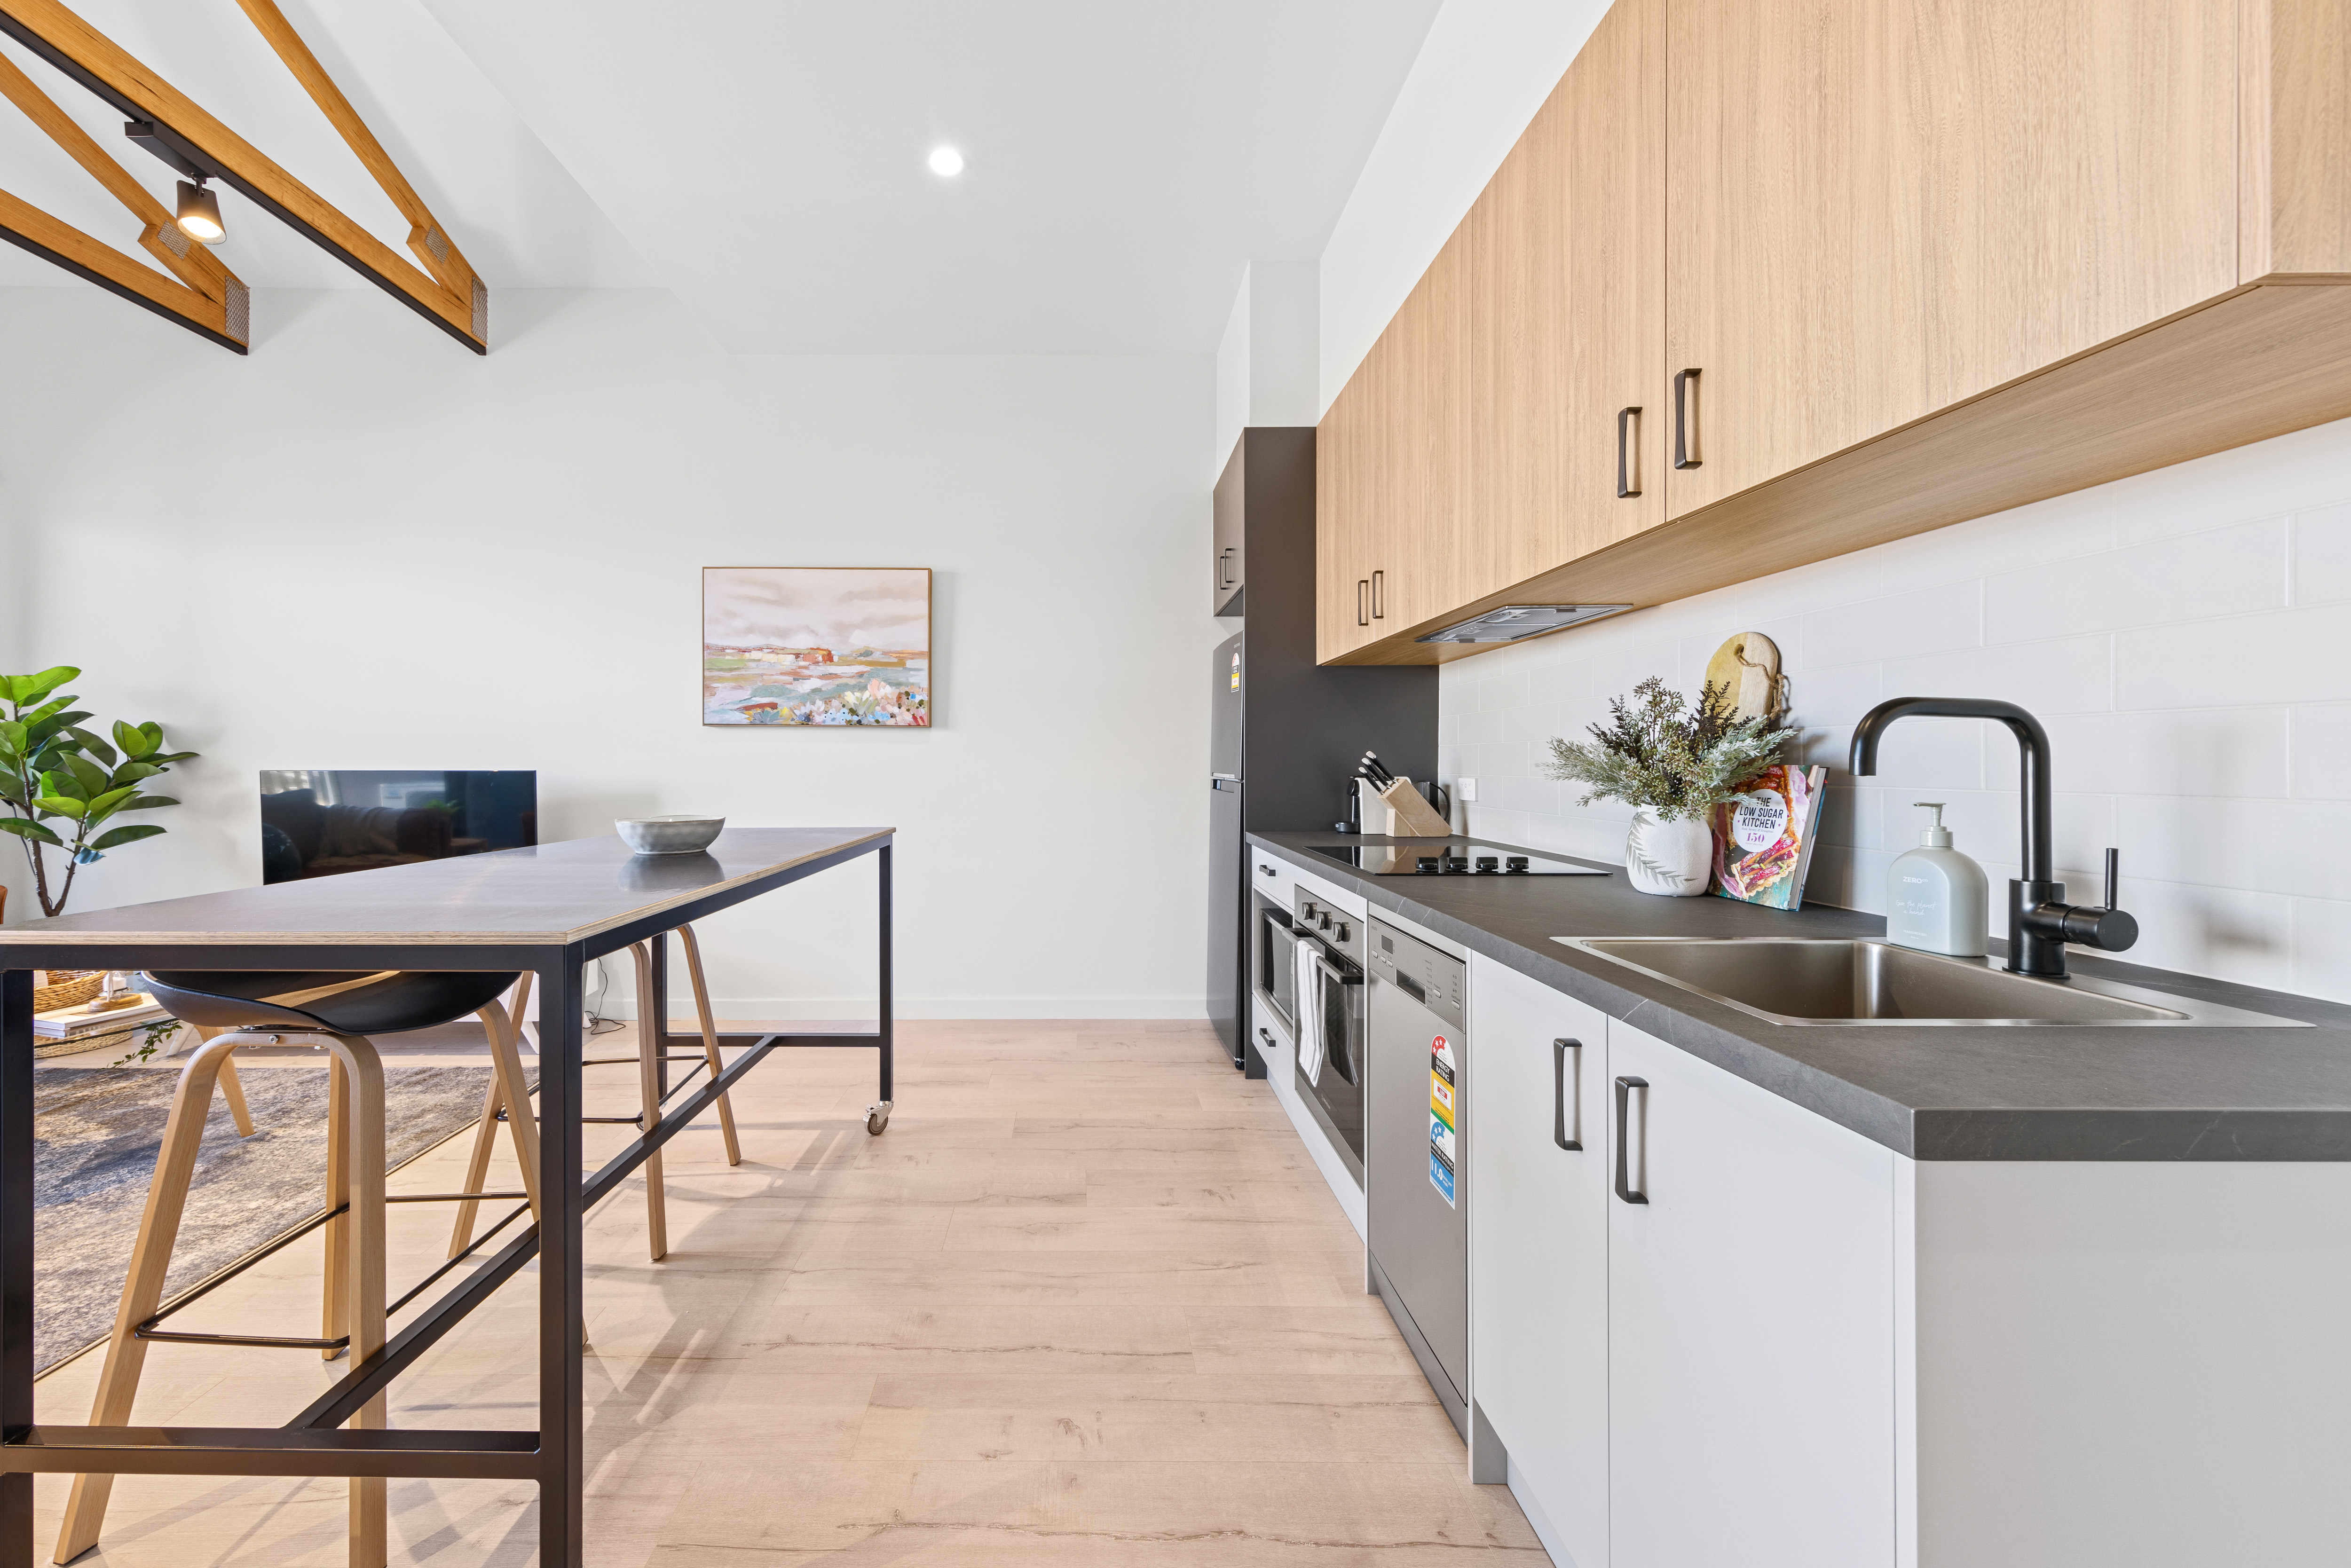 Kitchen - Two Bedroom Apartment - Urban Rest - Hobart Lane Apartments - Adelaide